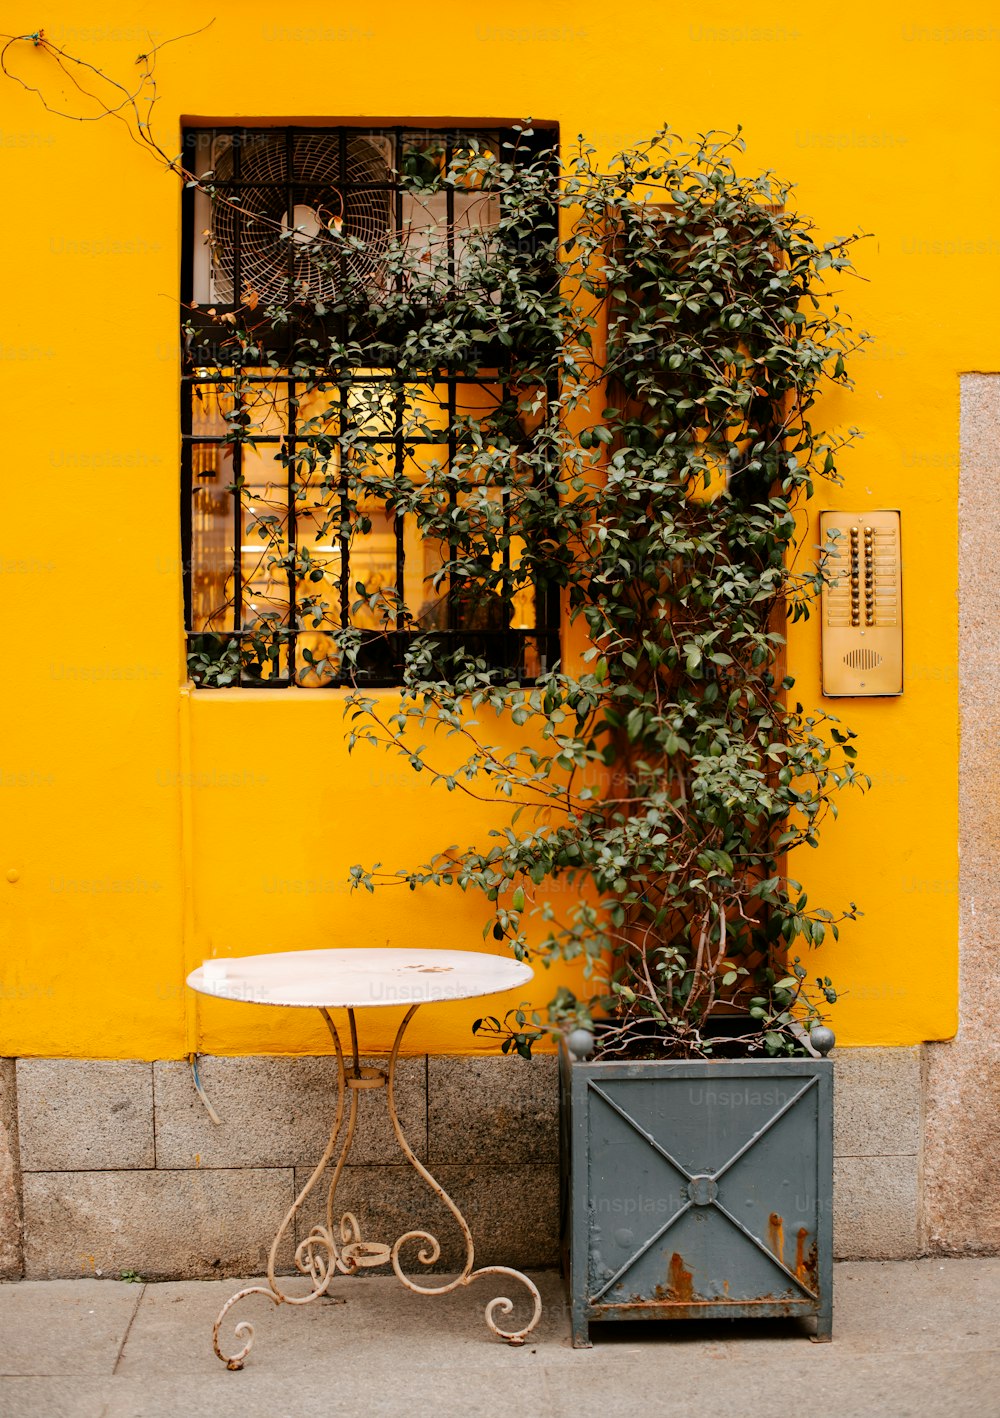 a small table and a plant in front of a yellow building